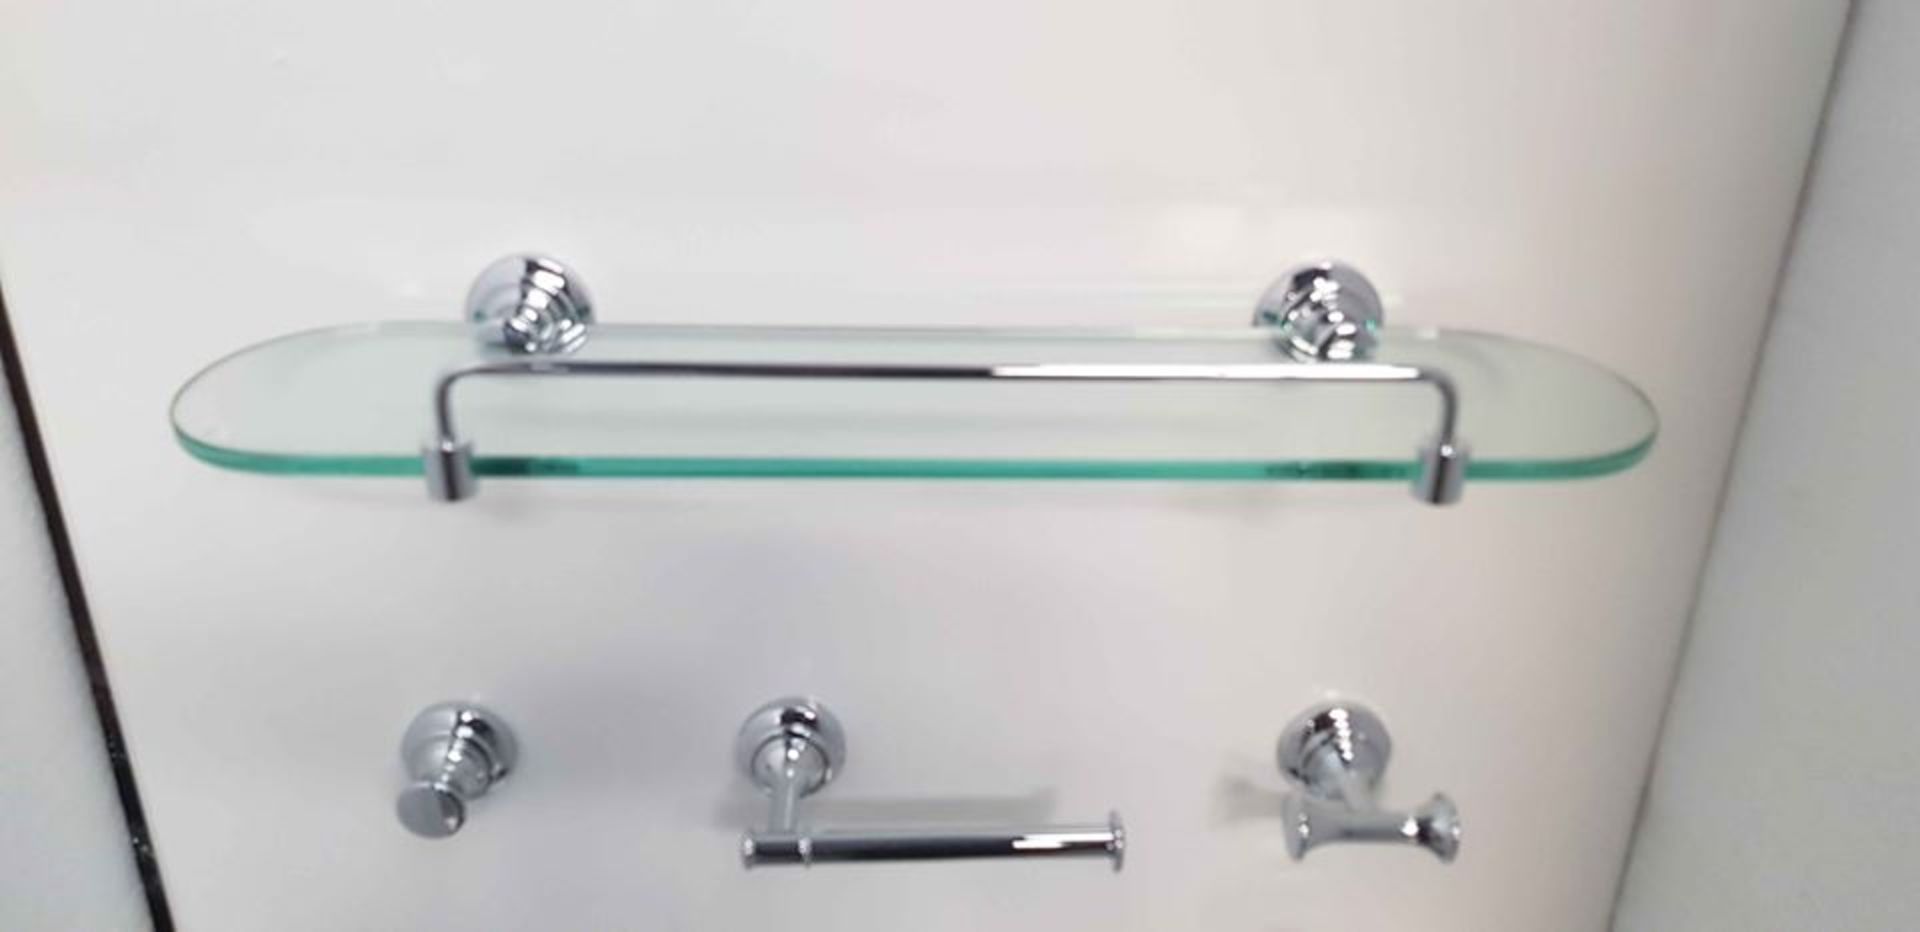 TRANSITION 12 PIECE, VERY HIGH QUALITY, BATHROOM ACCESSORY SET IN POLISHED CHROME & CERMAIC - Image 3 of 5